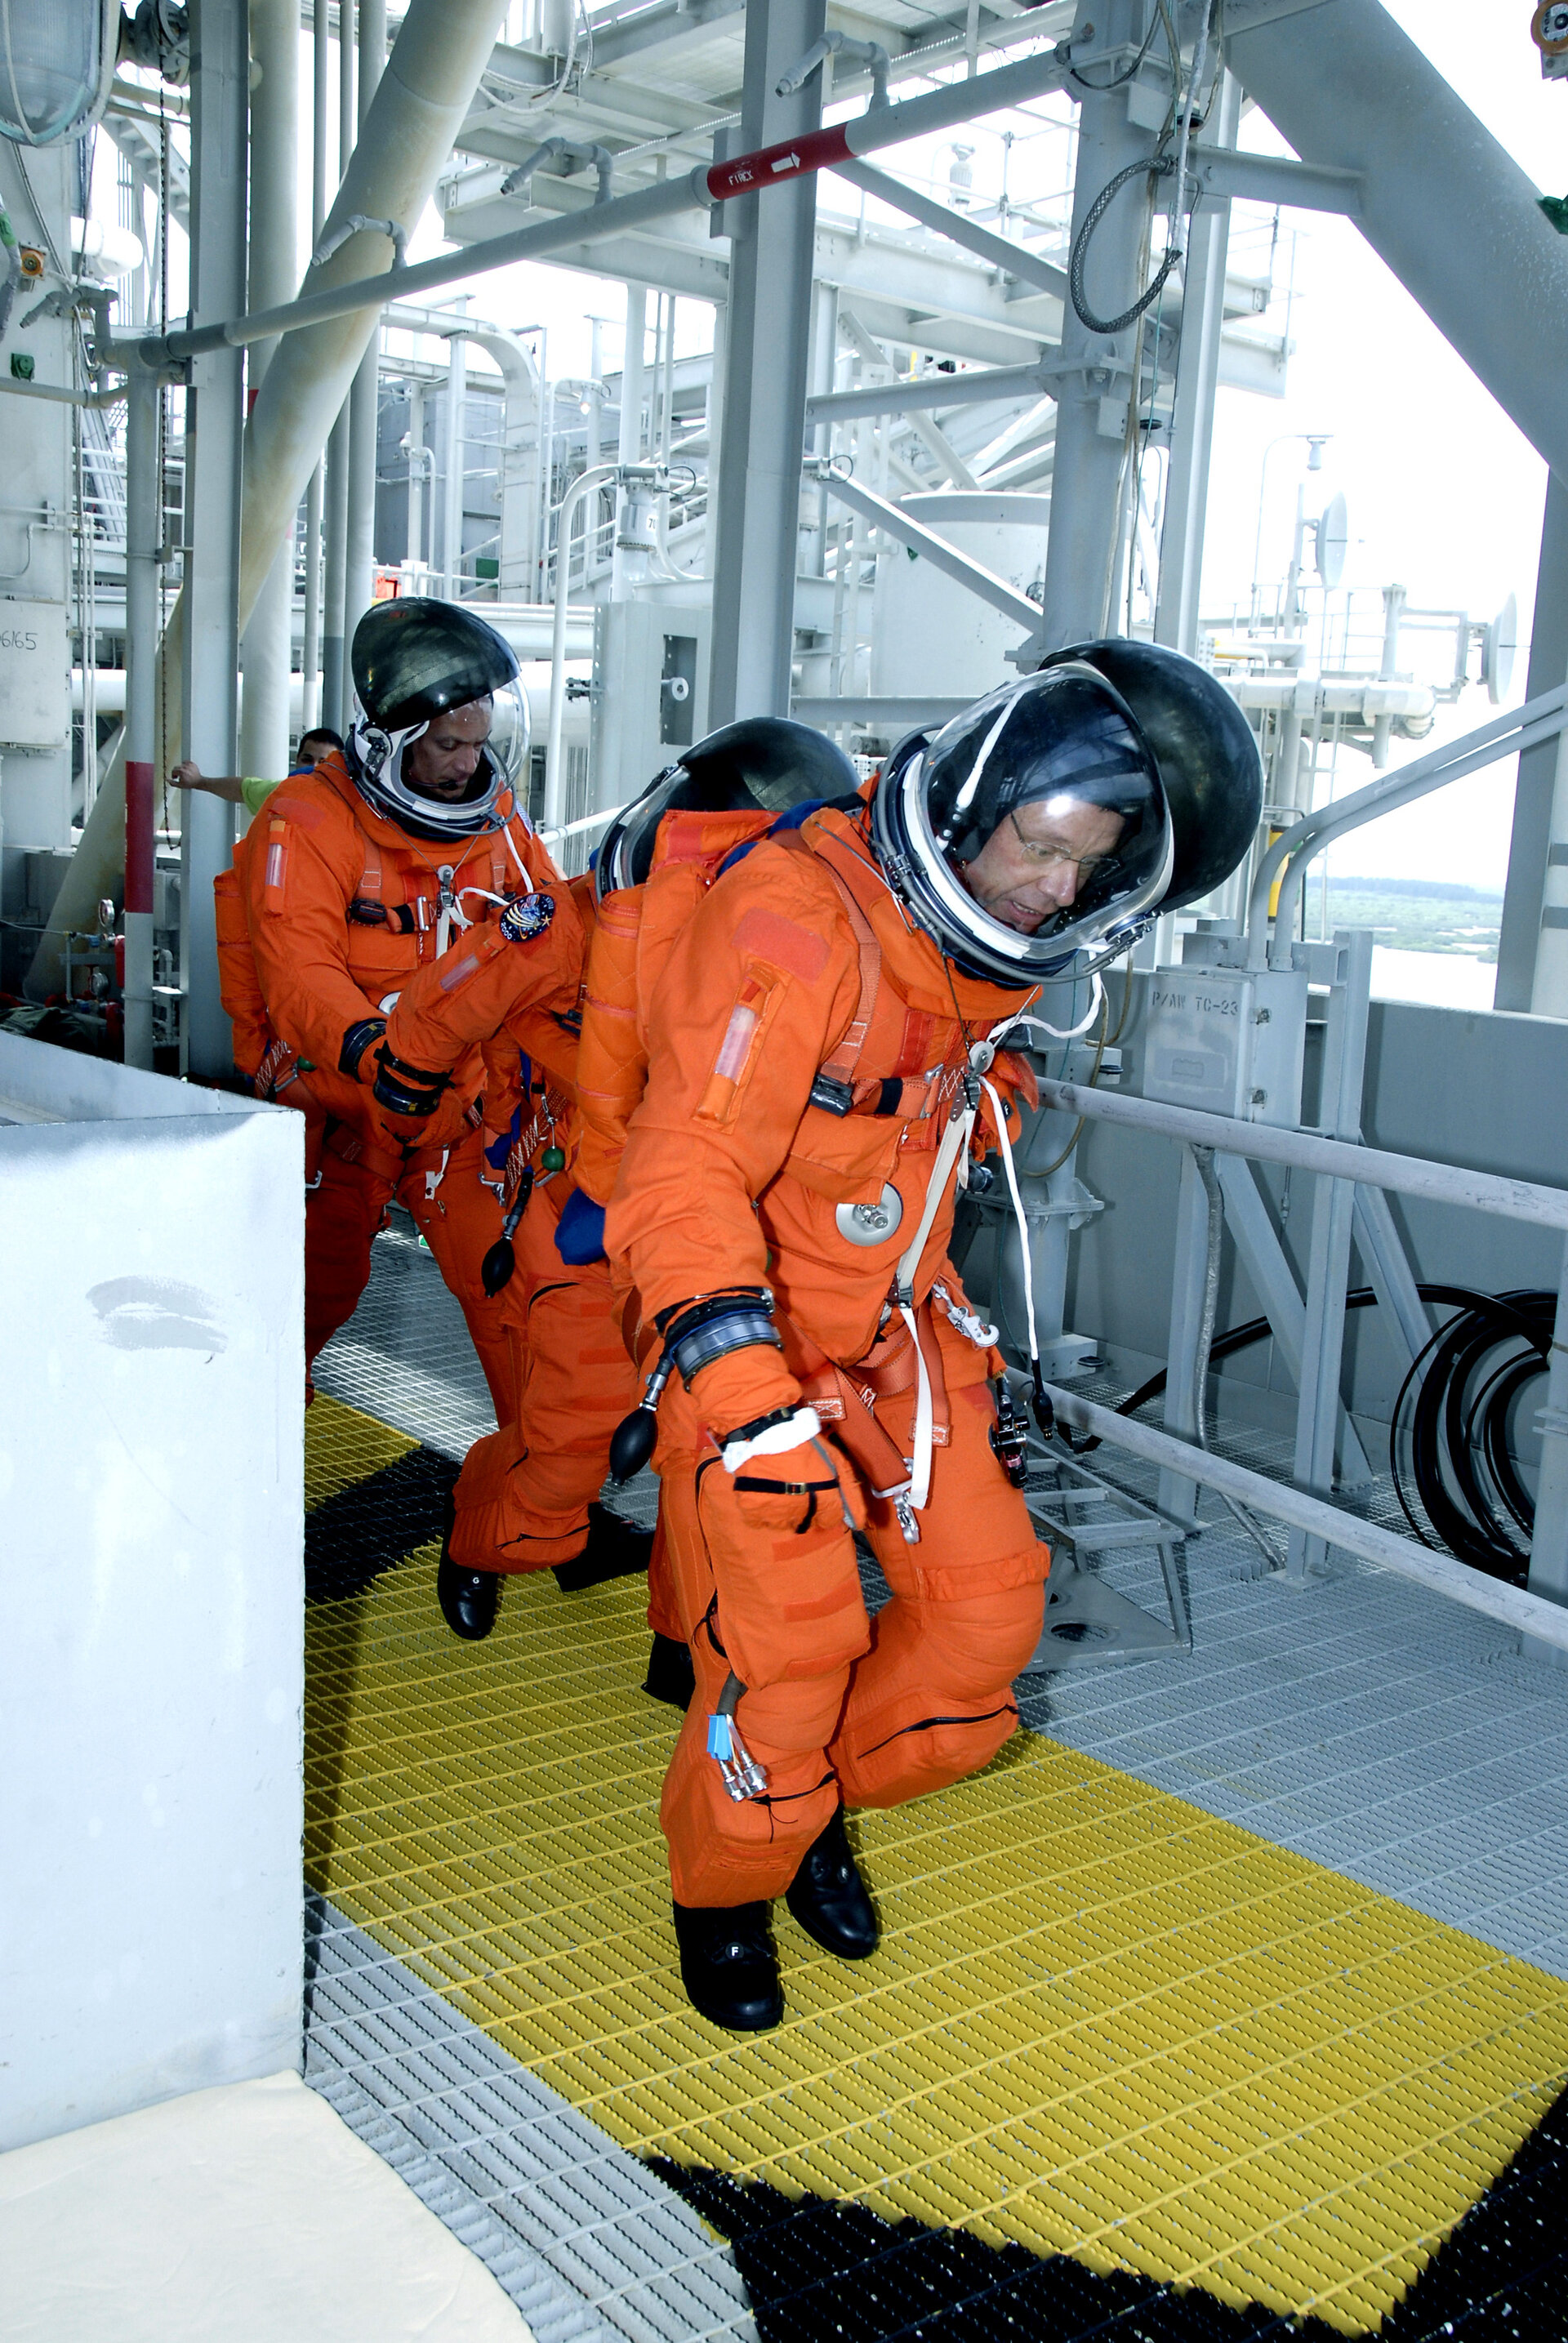 The STS-128 crew practice an emergency exit from the launch pad